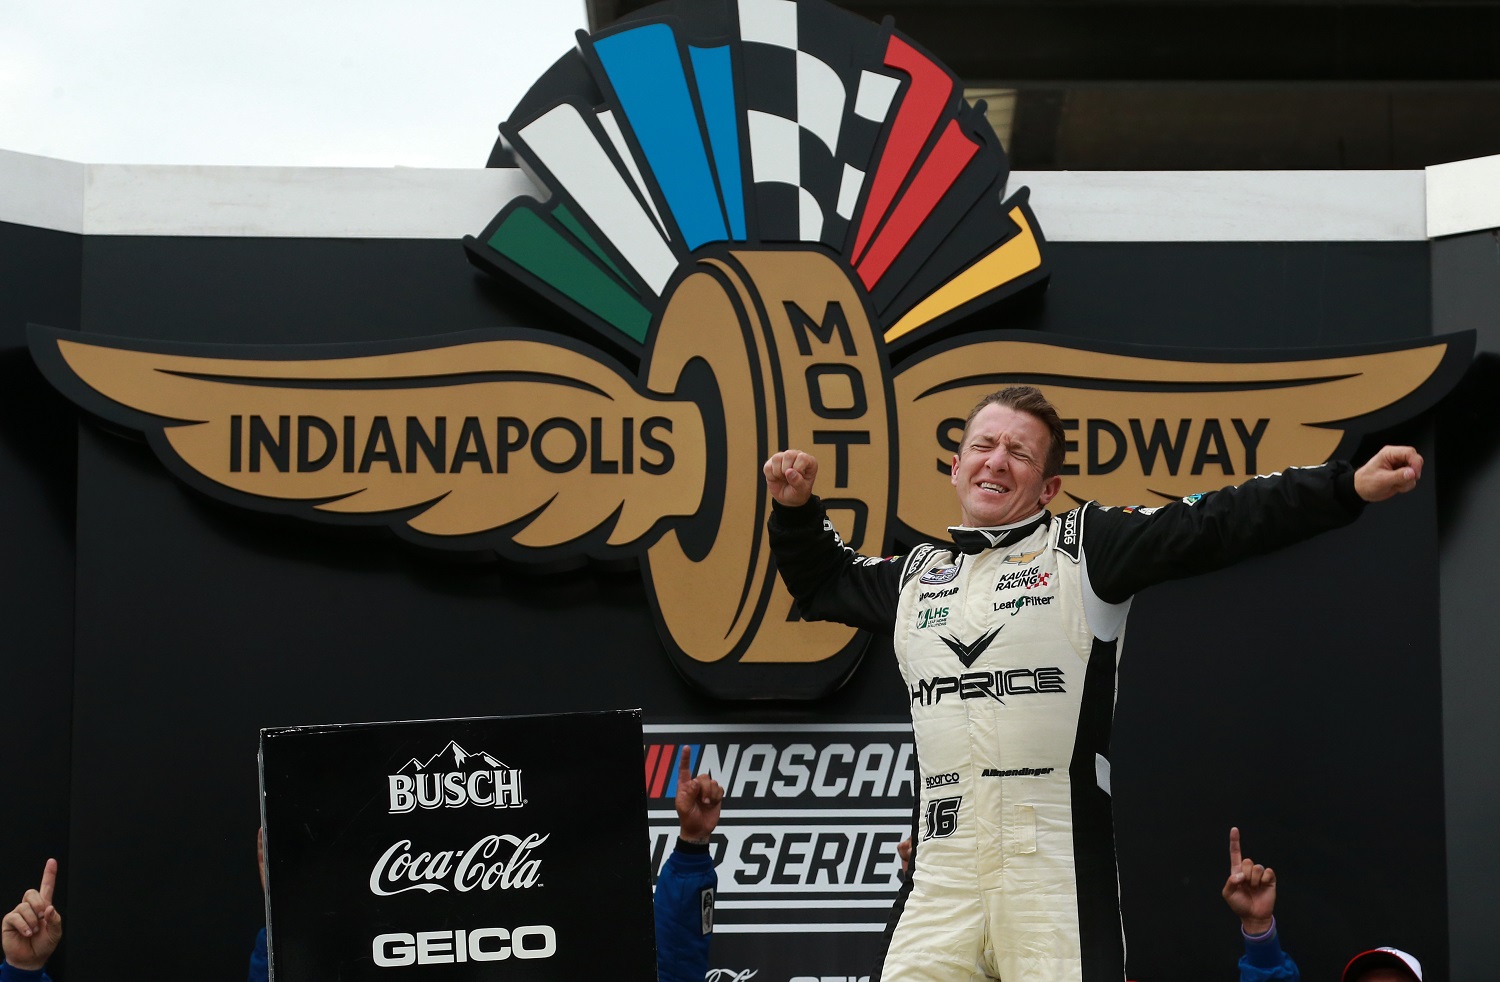 AJ Allmendinger celebrates in victory lane after winning the NASCAR Cup Series Verizon 200 at the Brickyard at Indianapolis Motor Speedway on Aug. 15, 2021, in Indianapolis, Indiana.